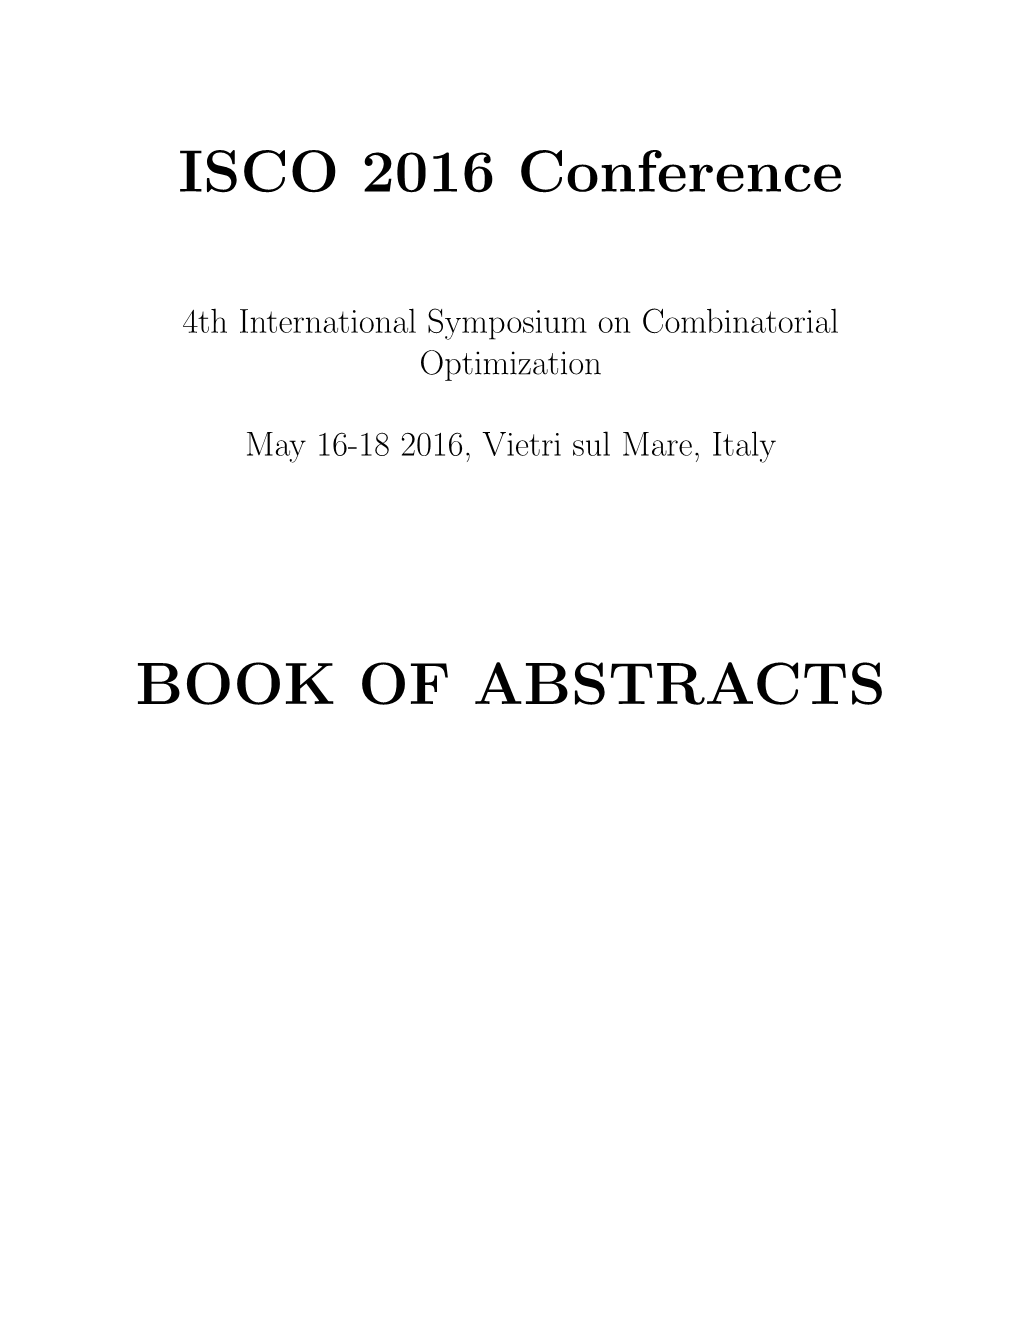 ISCO 2016 Conference BOOK of ABSTRACTS